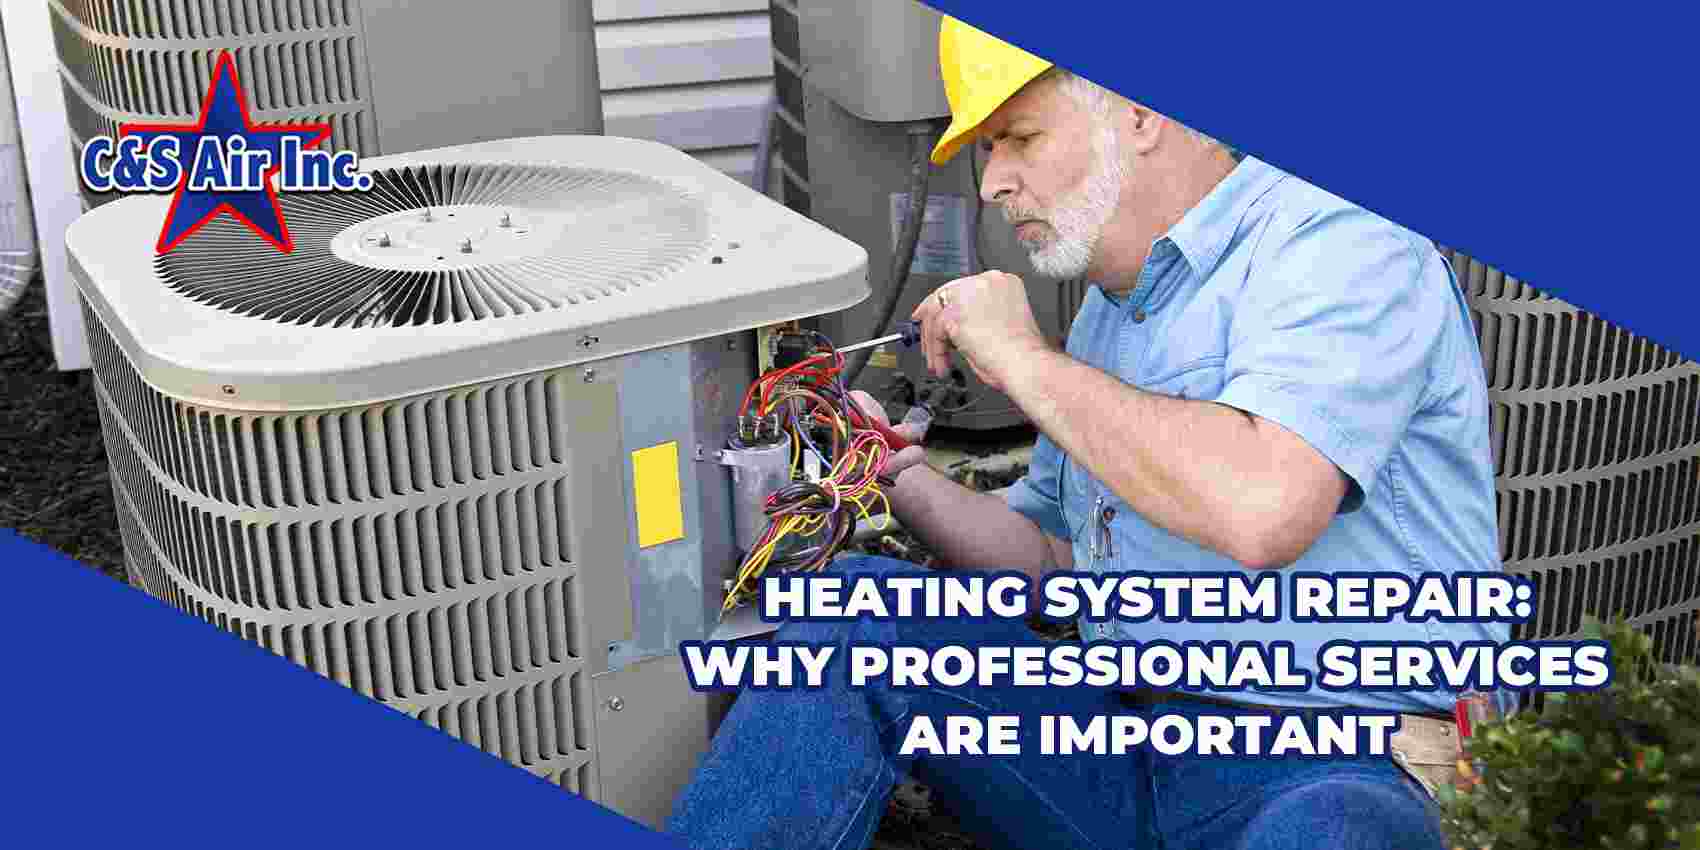 Heating System Repair: Why Professional Services are Important